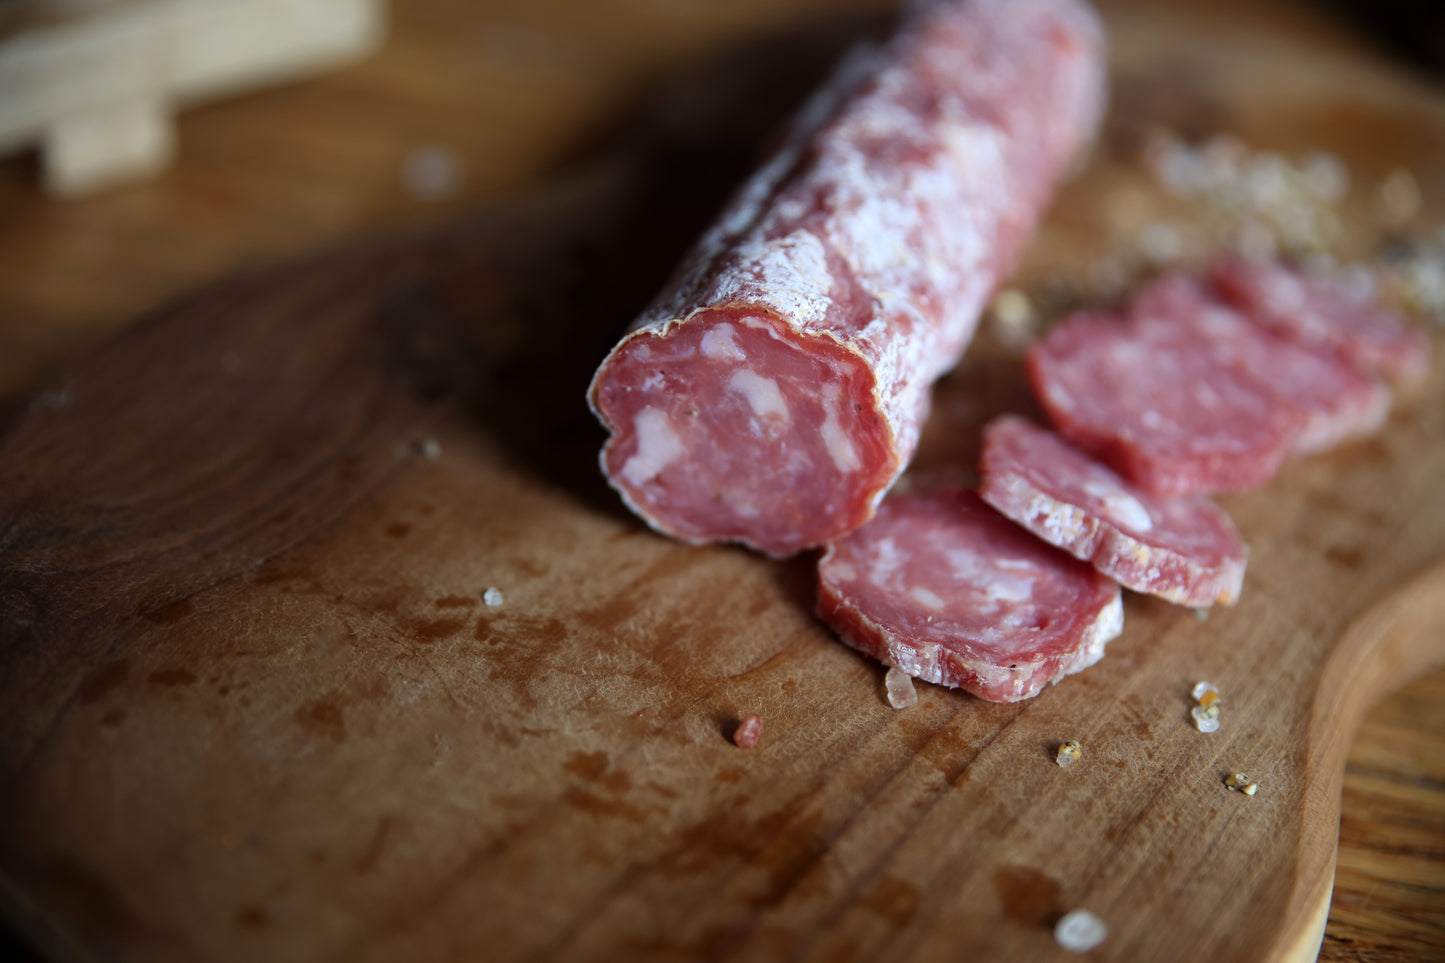 Salchichon Half Salami Approx 400g random weight packet. Regular price $12.50 AUD [You are guaranteed to receive at least 390g of product, equivalent price of $32.05 per kg.]